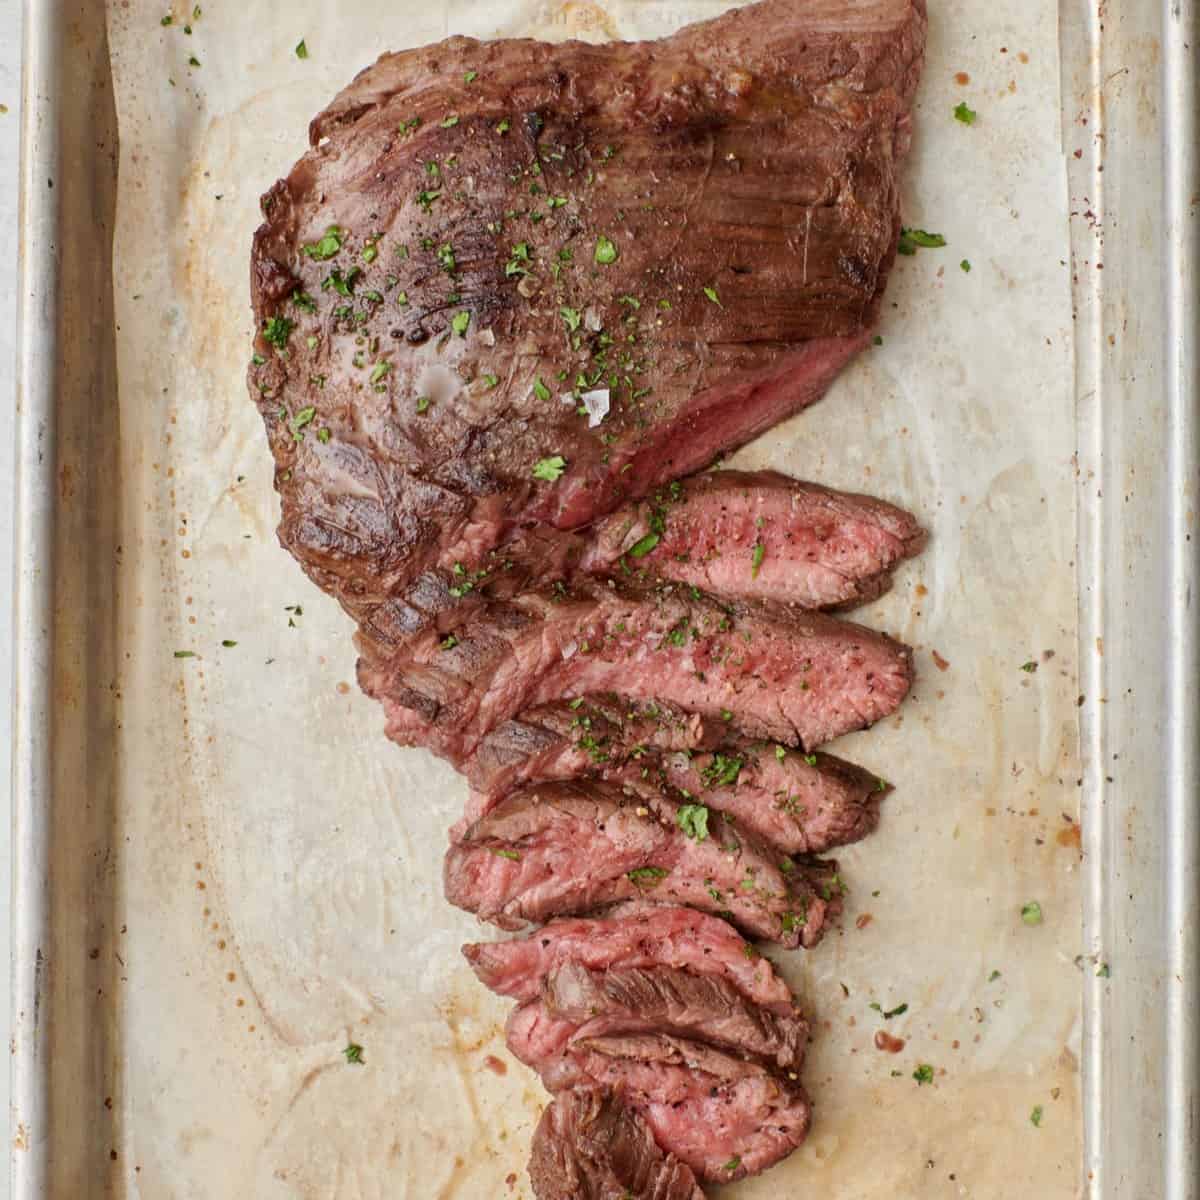 How to cook flank steak in the oven.